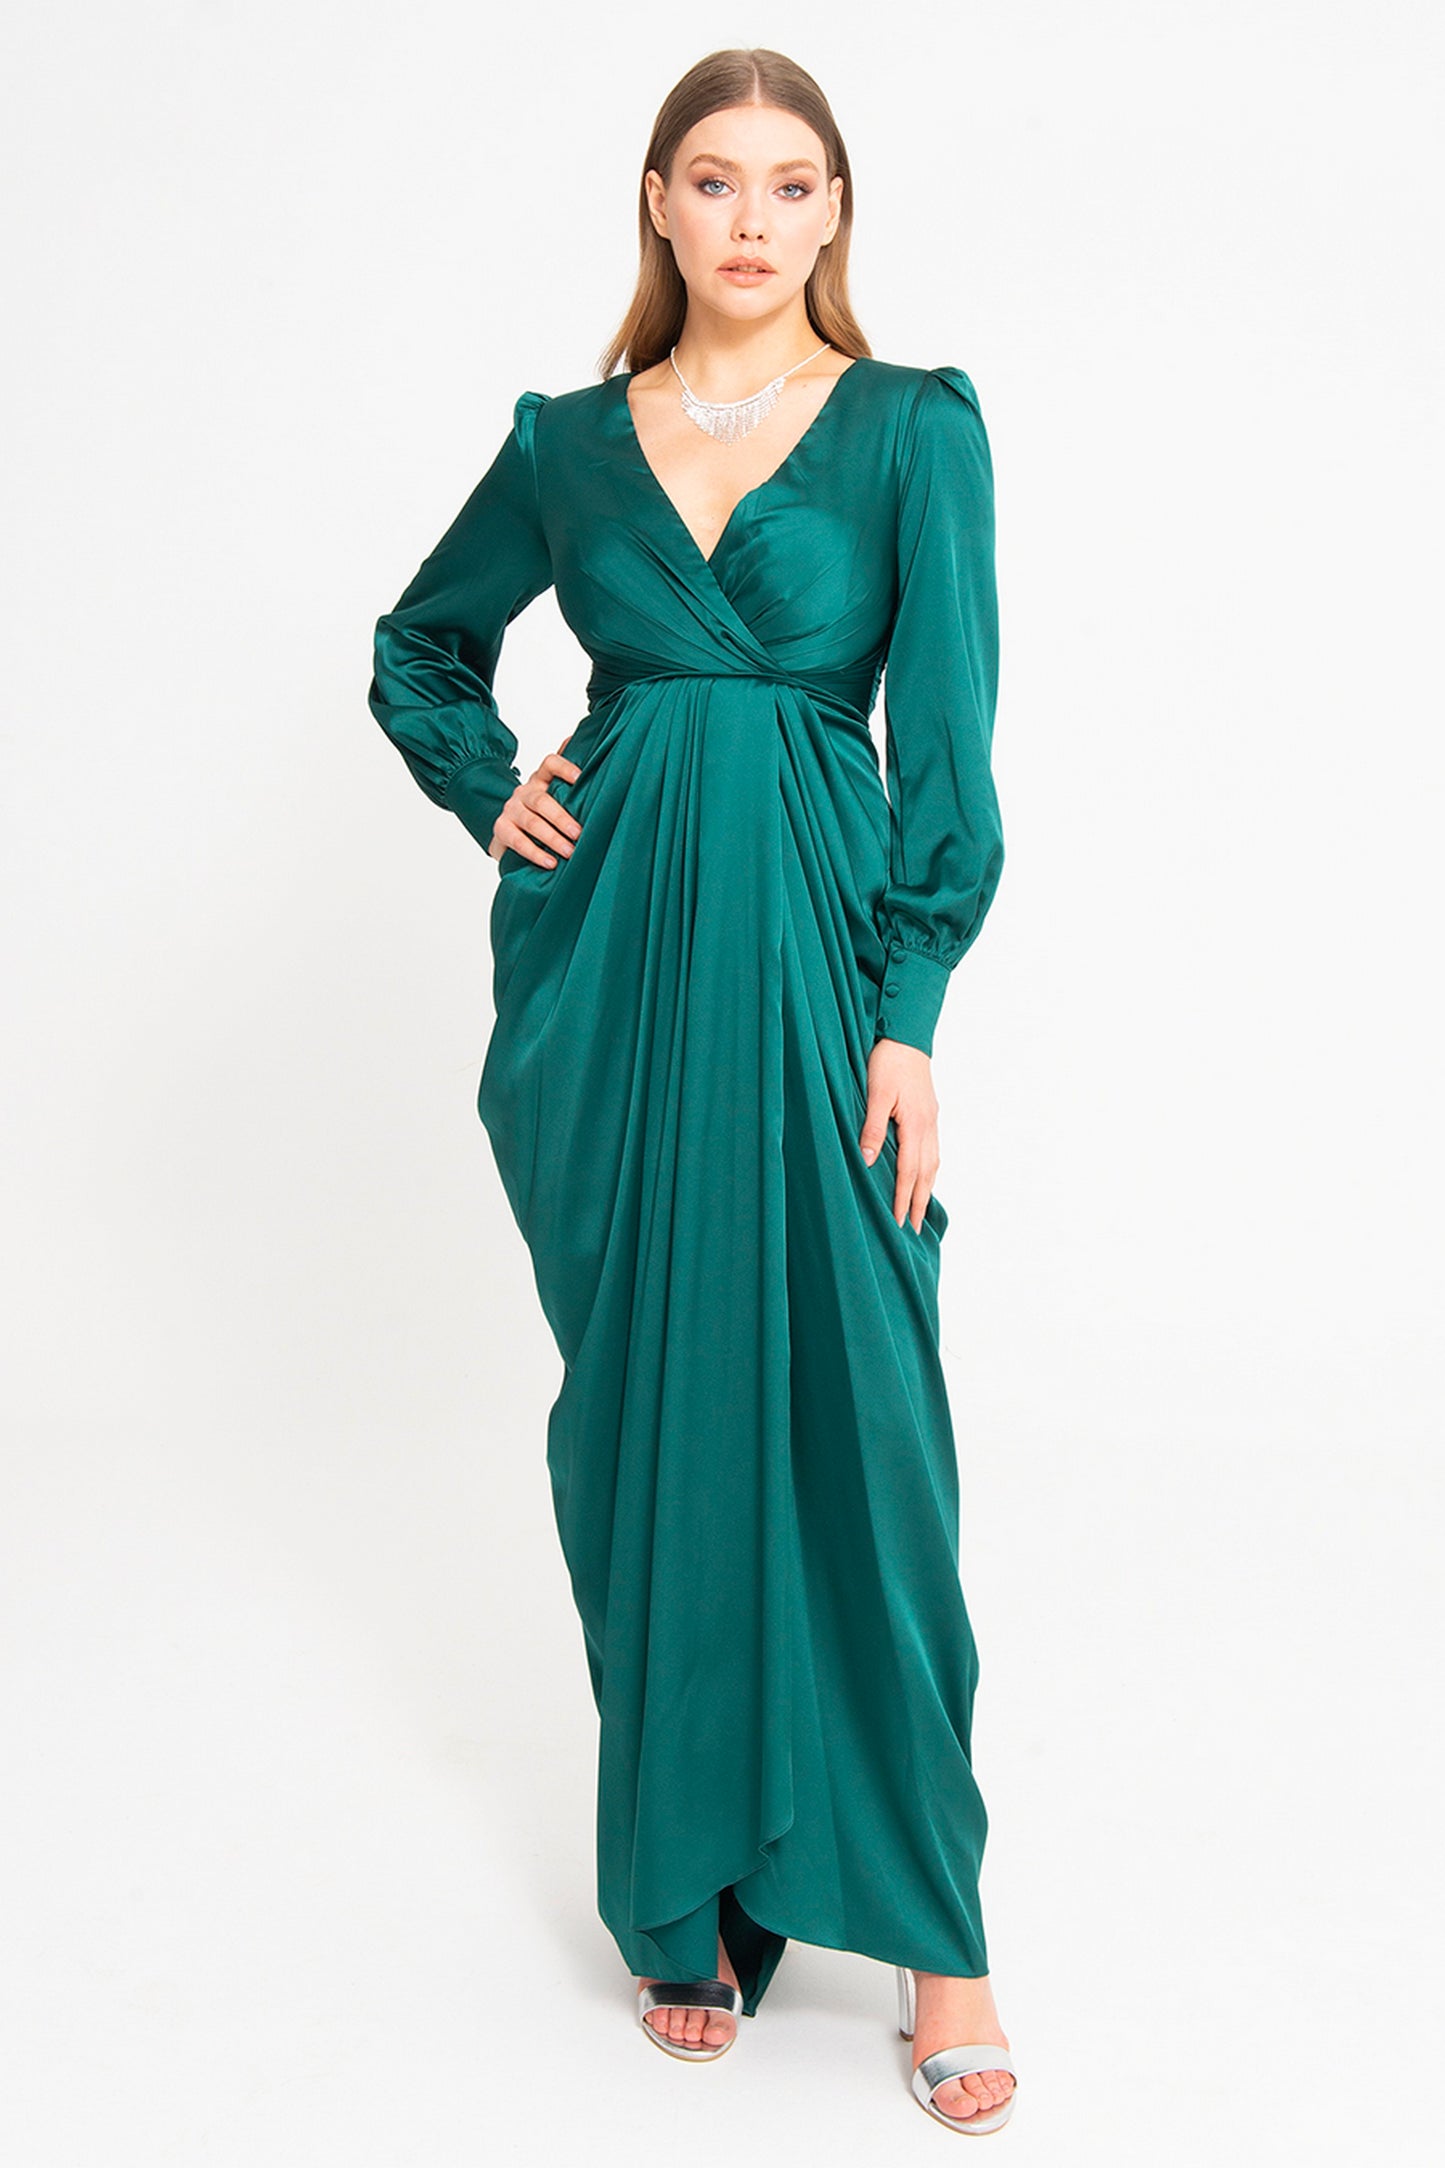 Veronica - Mystic Evenings | Evening and Prom Dresses